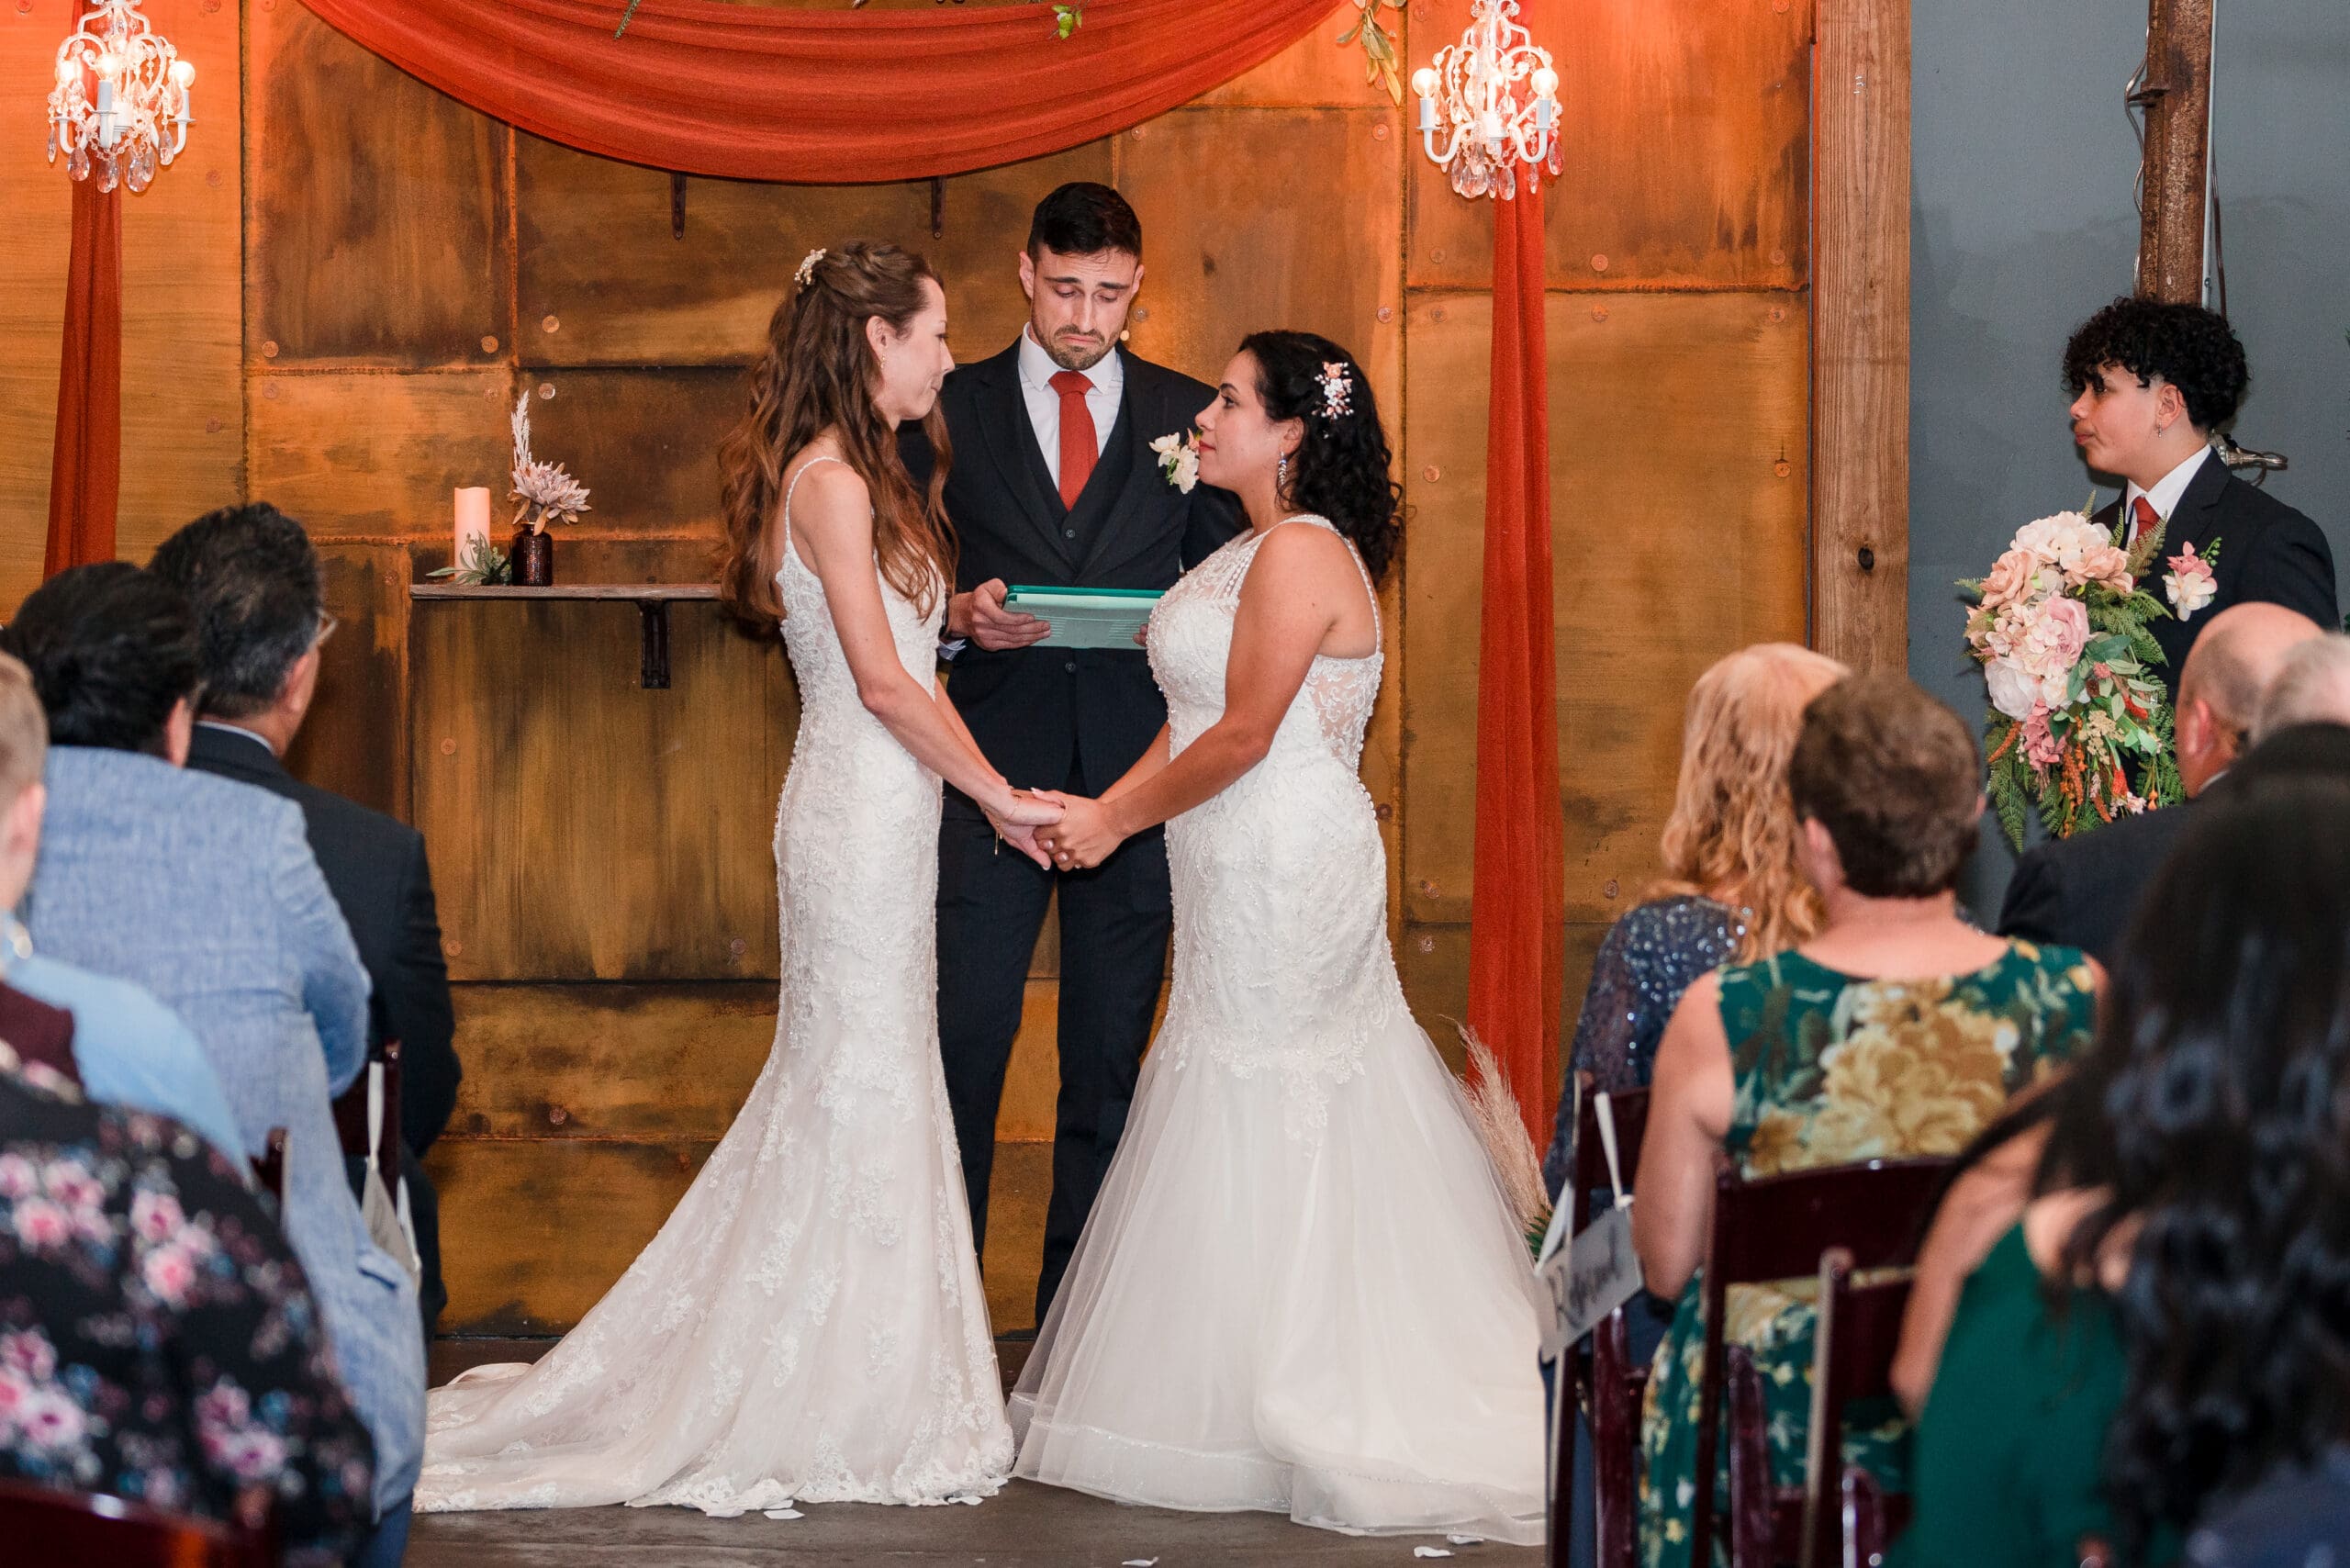 Two brides holding hands and looking into each other's eyes at the altar, surrounded by family and friends, with the officiant visibly moved by the love shared between them